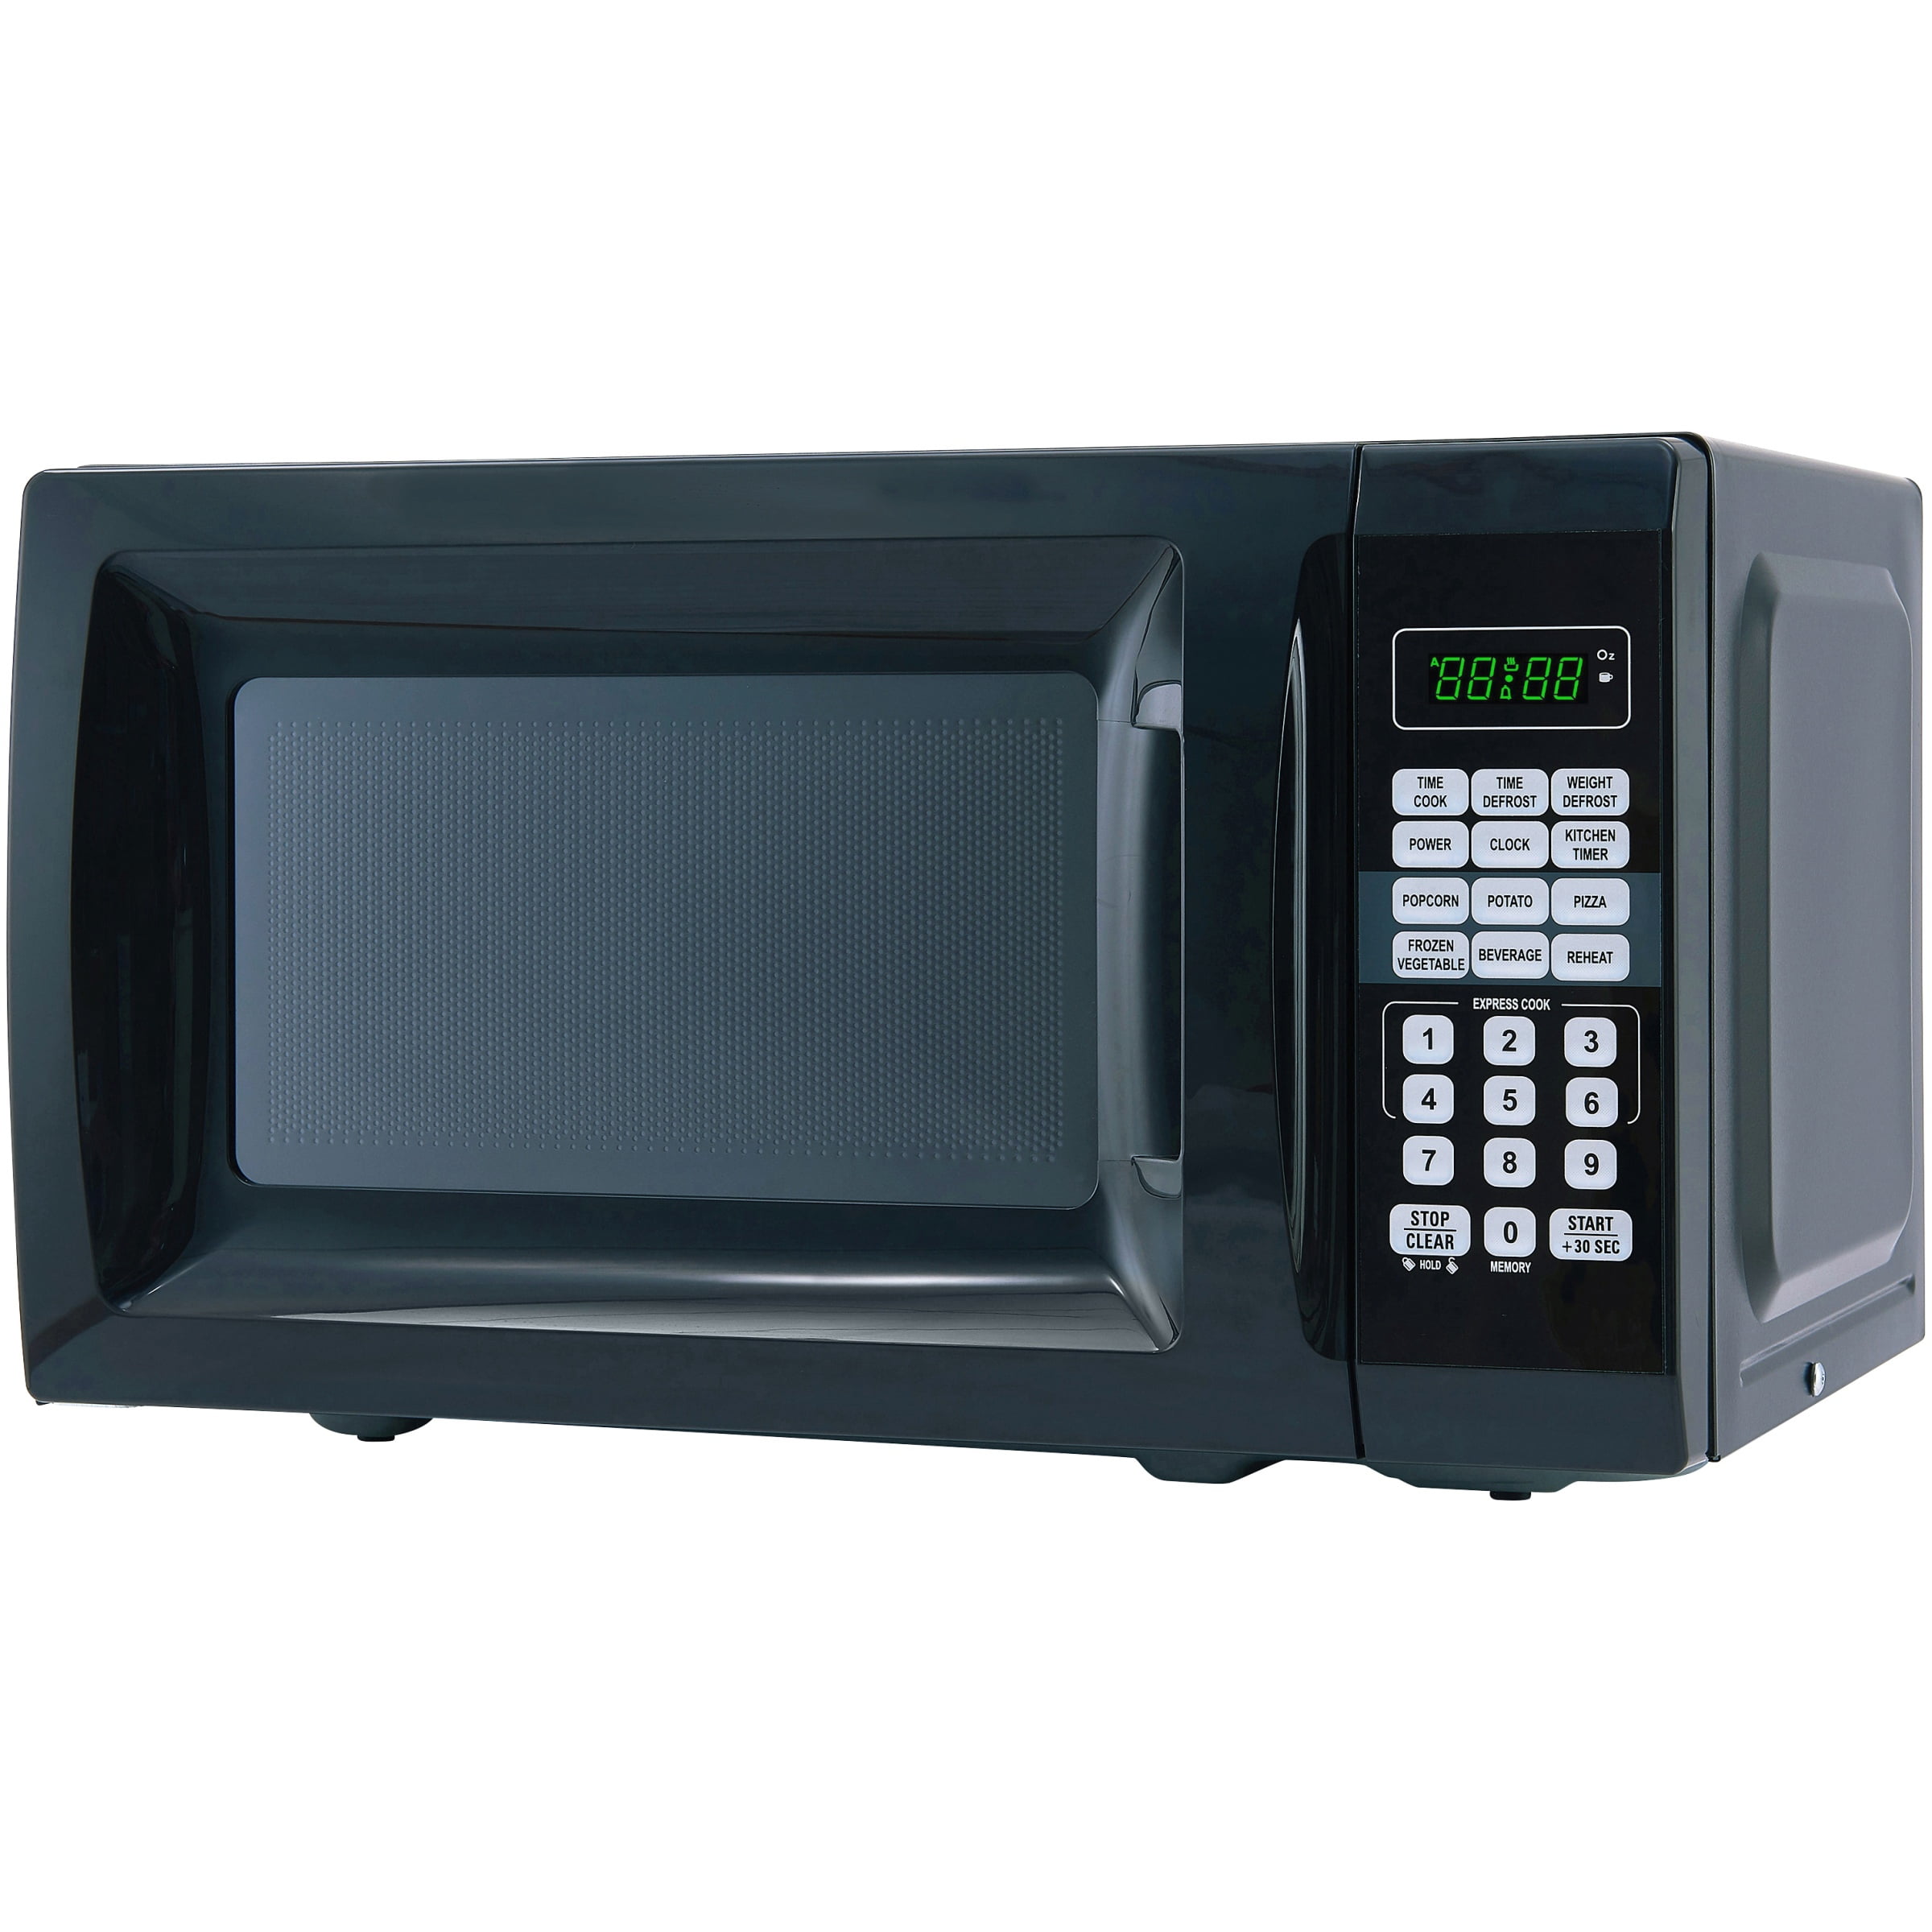 Mainstays 0.7 Cu ft Compact Countertop Microwave Oven, Black for Sale in  North Las Vegas, NV - OfferUp